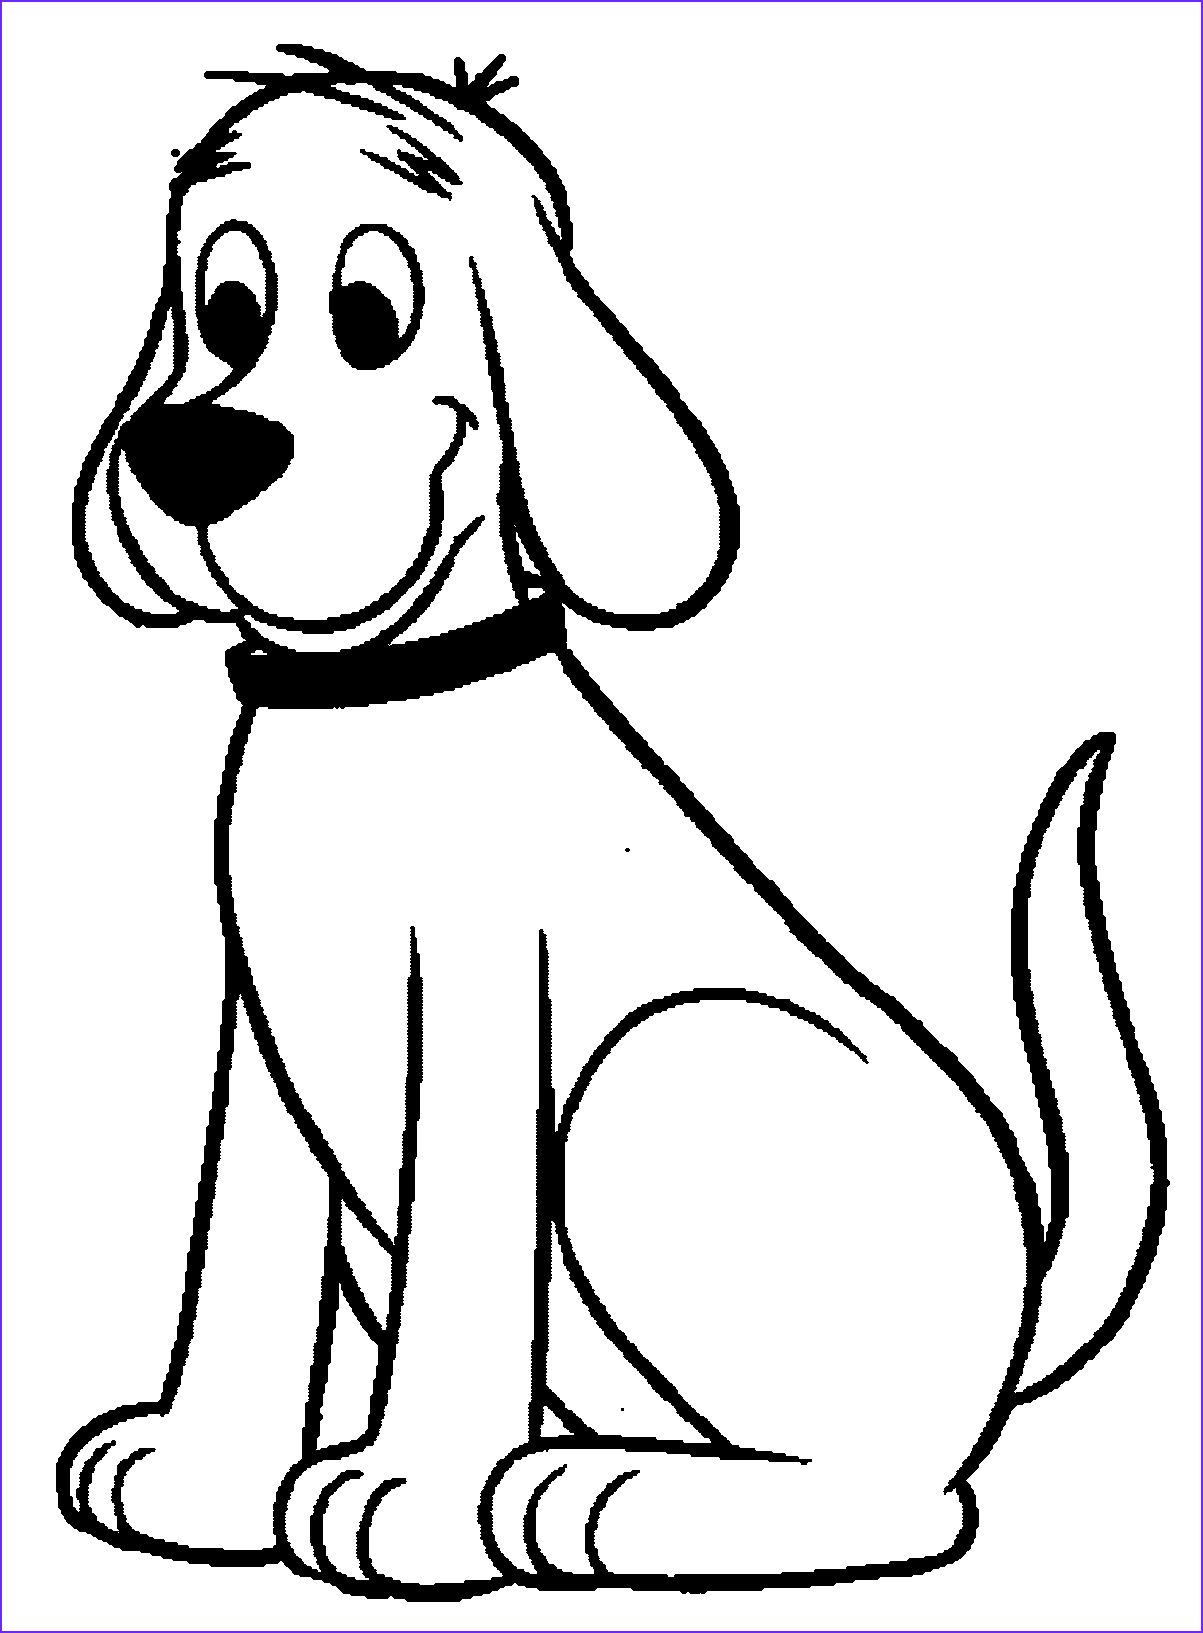 puppy clifford coloring pages